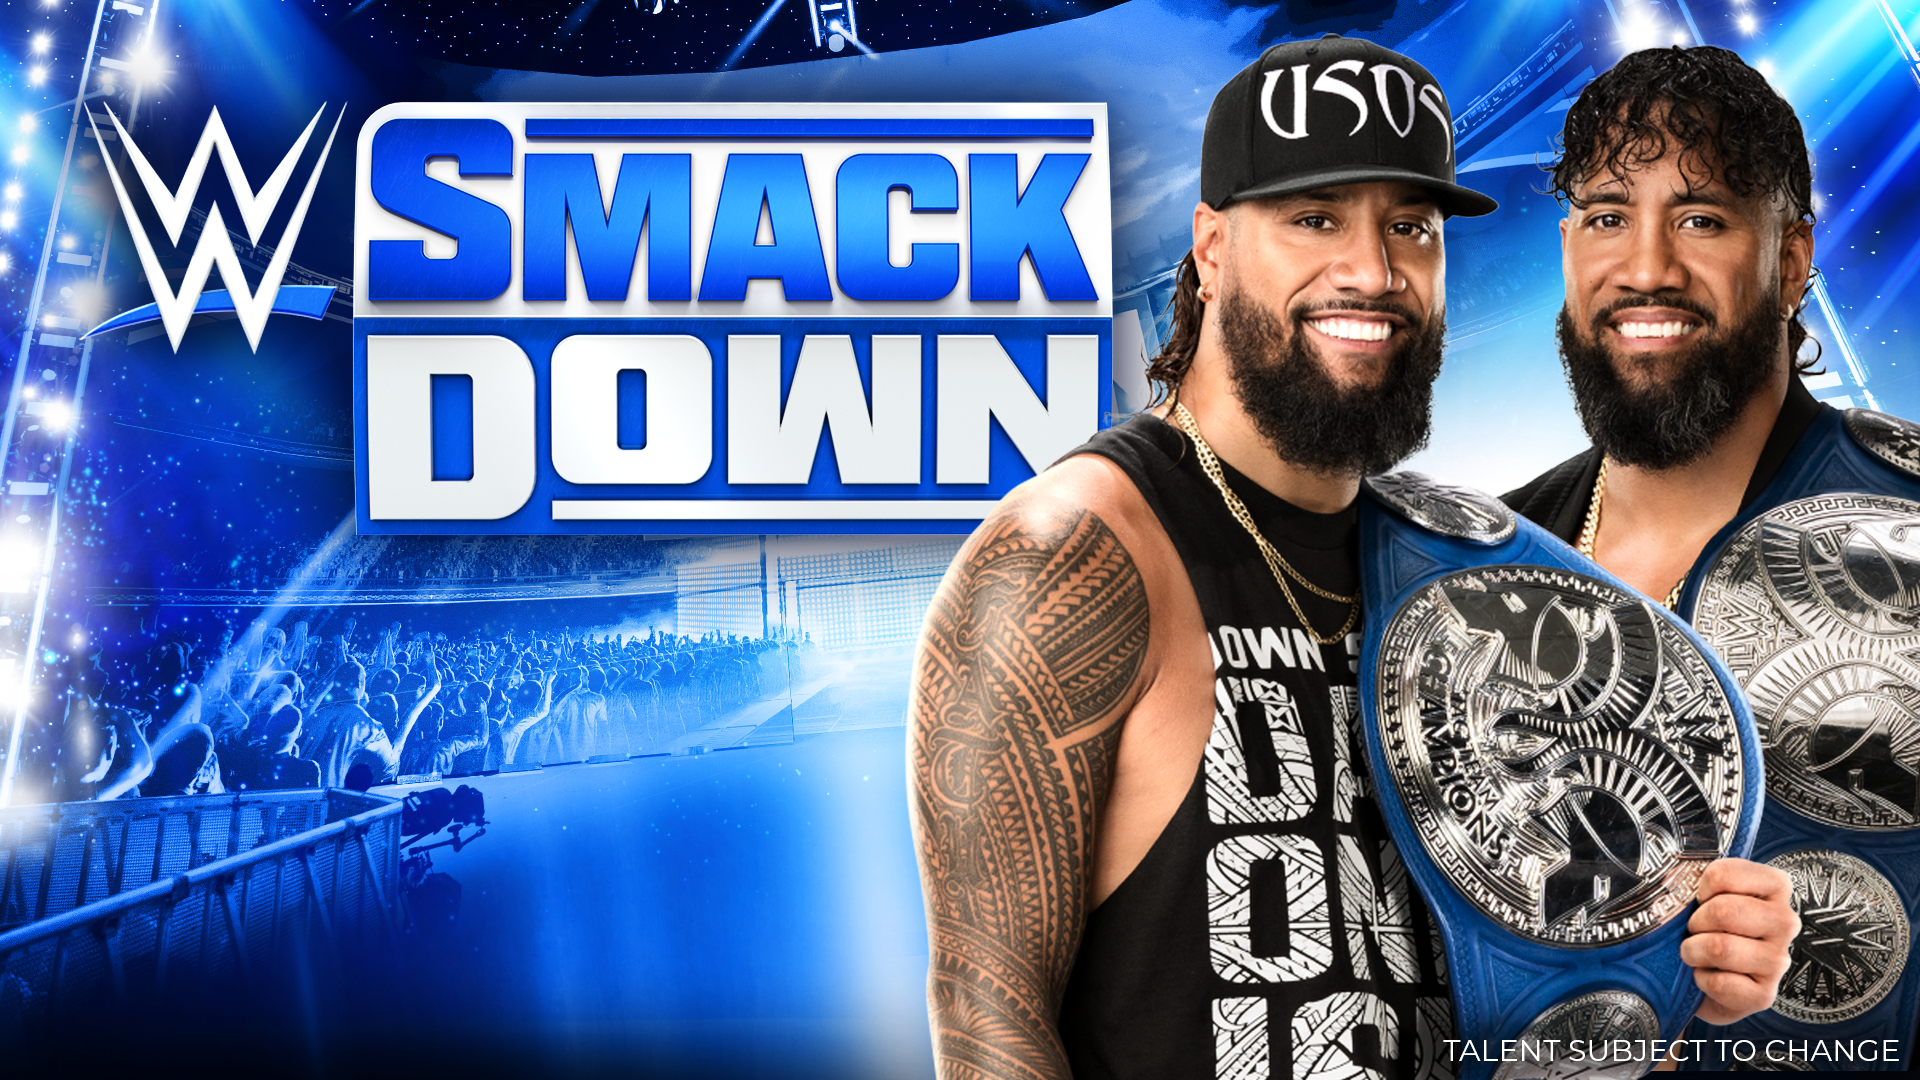 WWE SmackDown Results May 20, live blog & live streaming details: WWE SmackDown, follow live updates